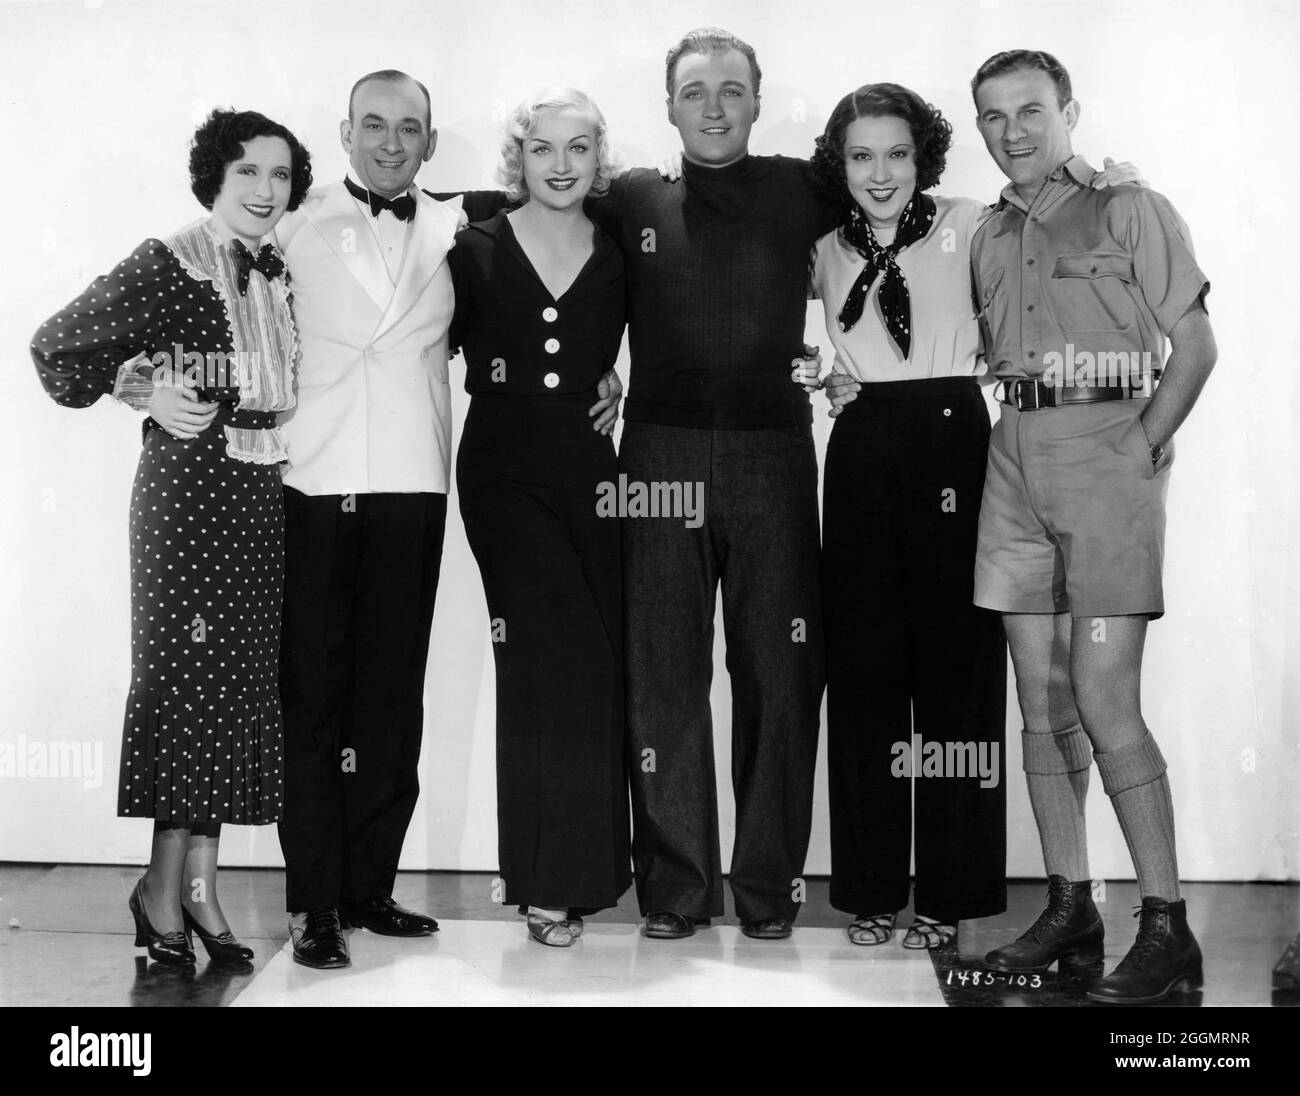 GRACIE ALLEN LEON ERROL CAROLE LOMBARD BING CROSBY (with taped back ears) ETHEL MERMAN and GEORGE BURNS publicity portrait for WE'RE NOT DRESSING 1934 director NORMAN TAUROG inspired by J.M. Barrie's The Admirable Crichton costume design Travis Banton Paramount Pictures Stock Photo